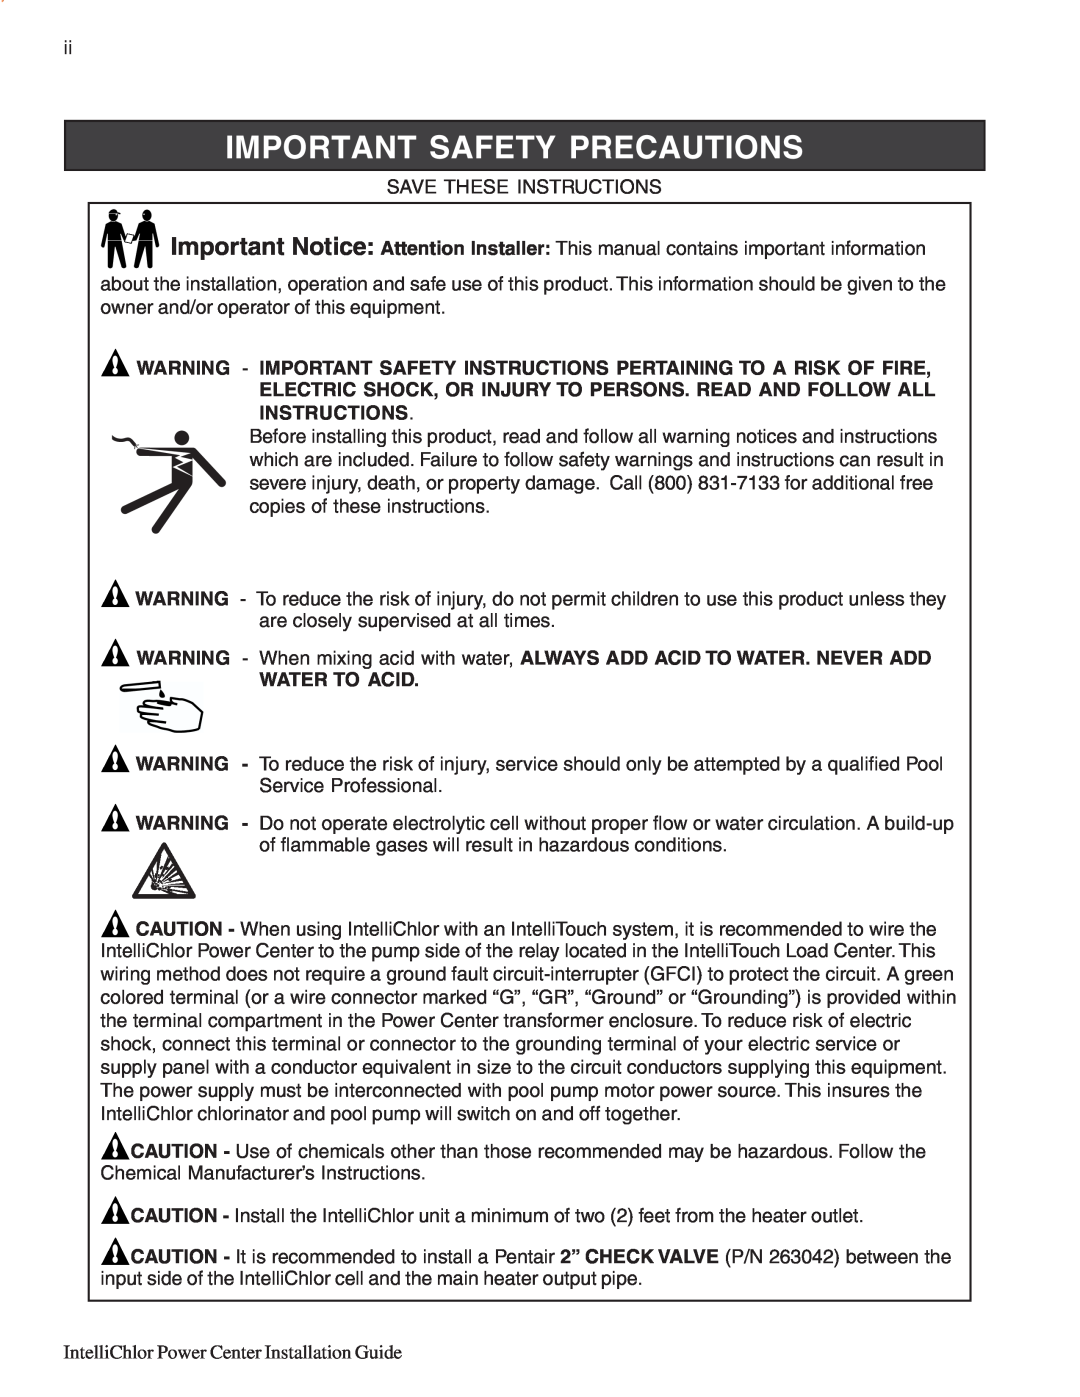 Pentair C40, C20 Warning - Important Safety Instructions Pertaining To A Risk Of Fire, Water To Acid 